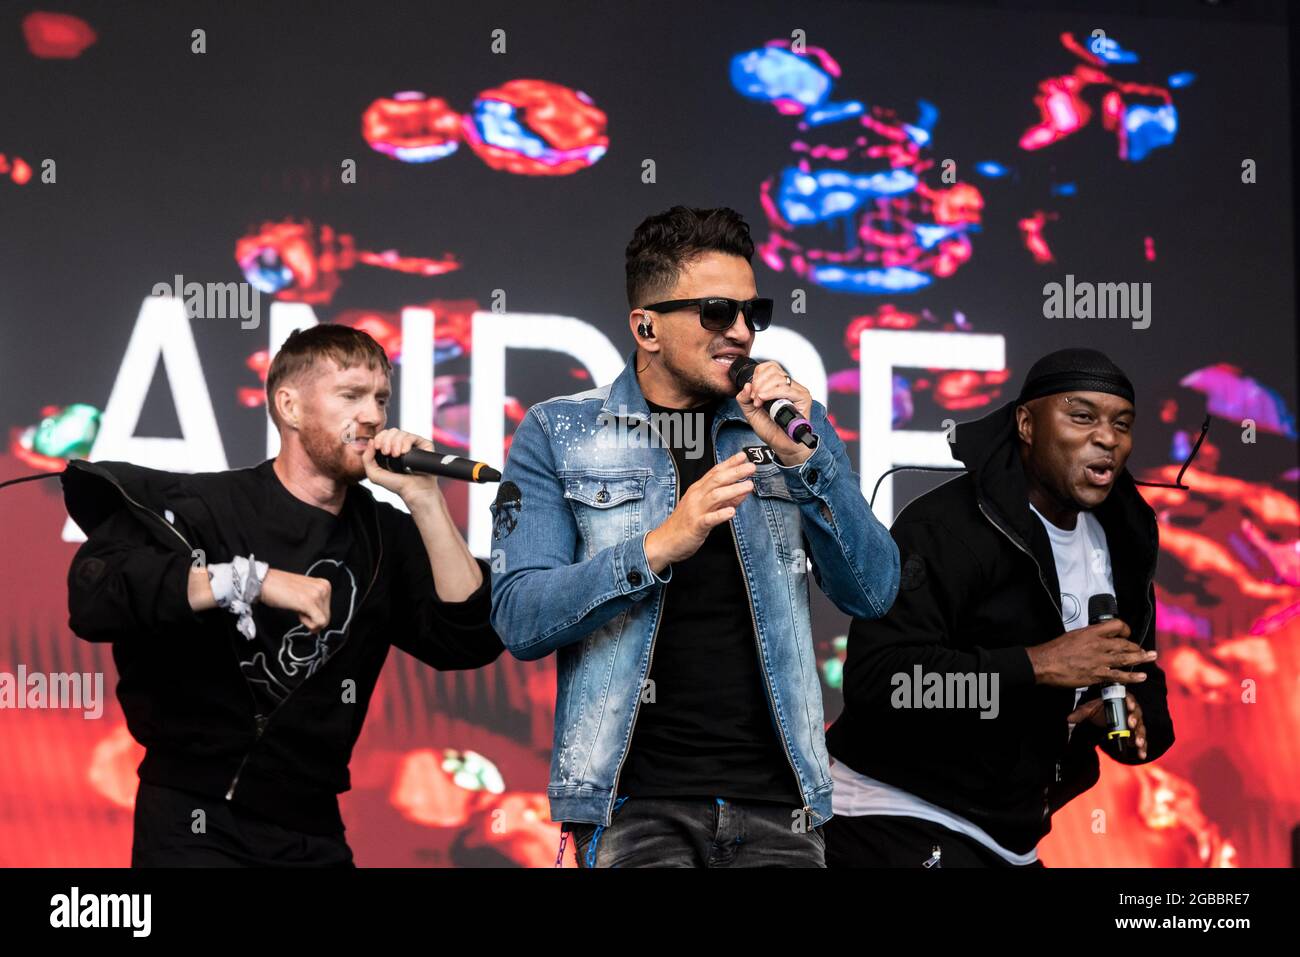 Peter Andre performing on stage with backing singers at the Fantasia music concert in Maldon, Essex, UK soon after lifting of COVID restrictions Stock Photo